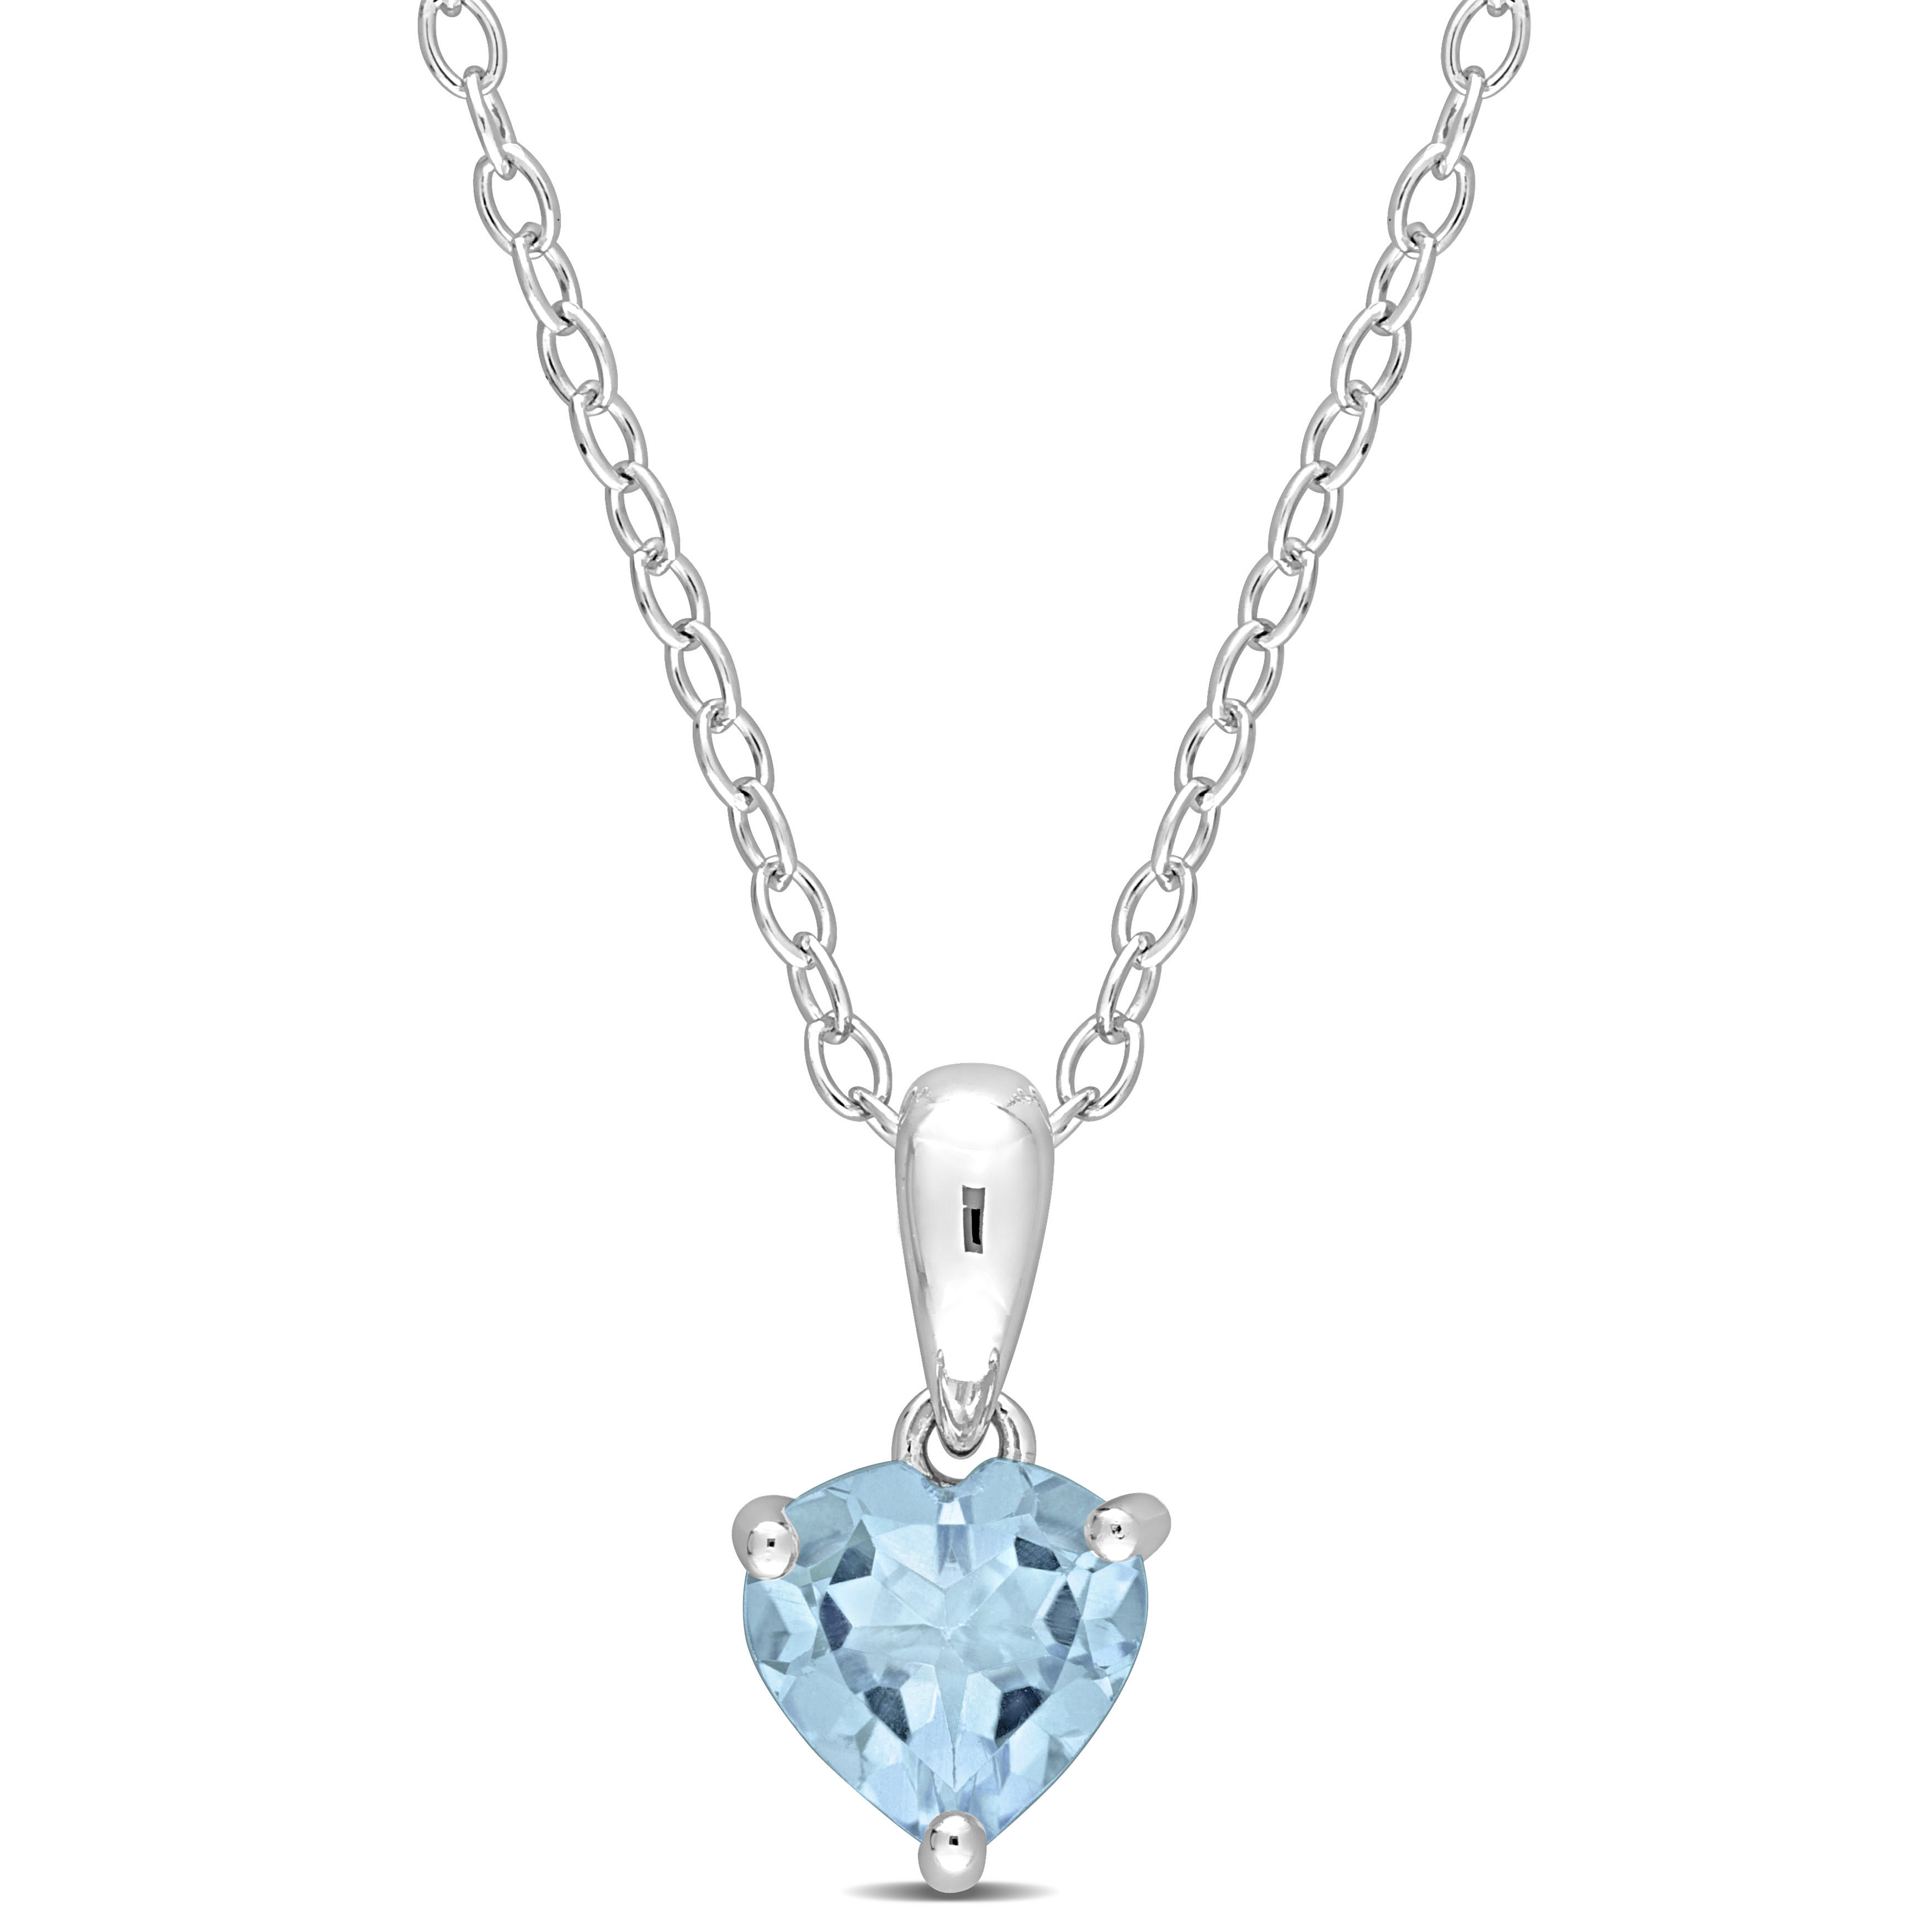 1 CT TGW Heart Shape Sky Blue Topaz Solitaire Heart Design Pendant with Chain in Sterling Silver - 18 in.